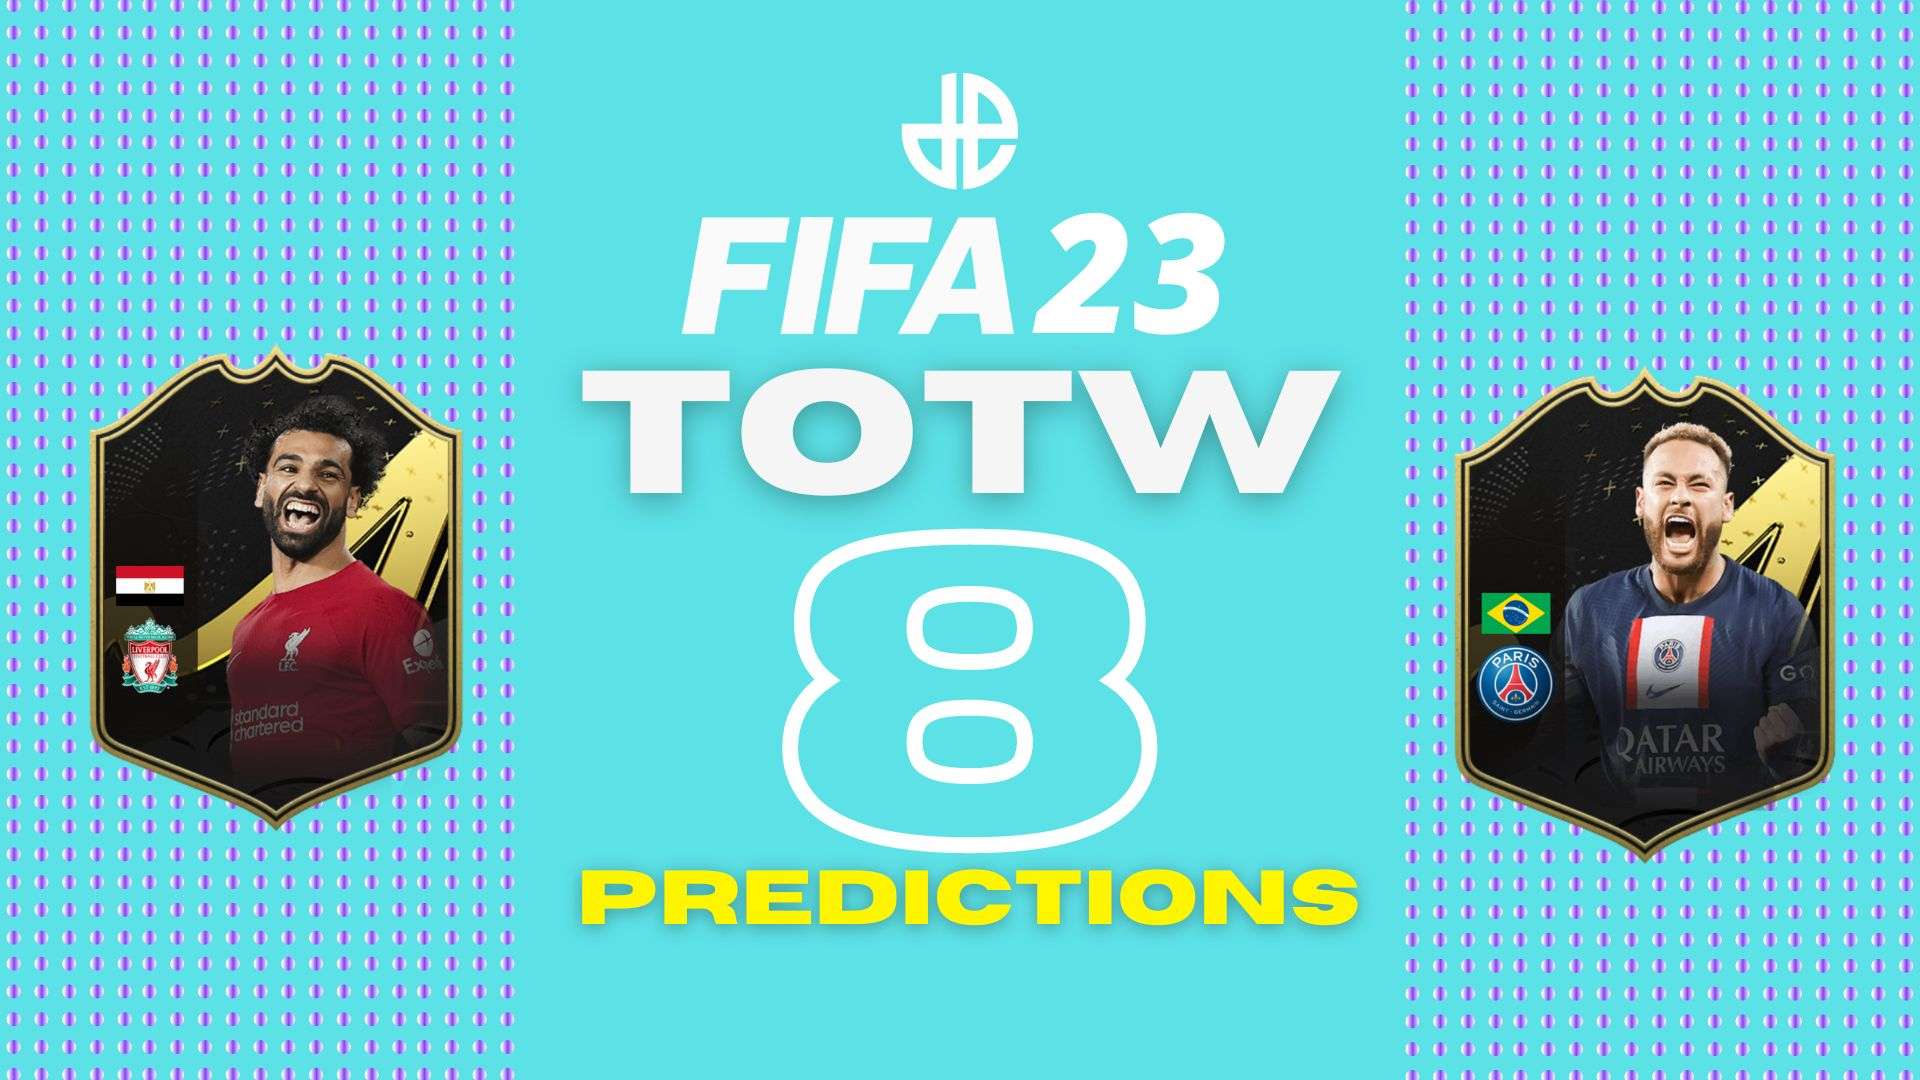 FIFA 23 TOTW 8 predictions with salah and neymar cards